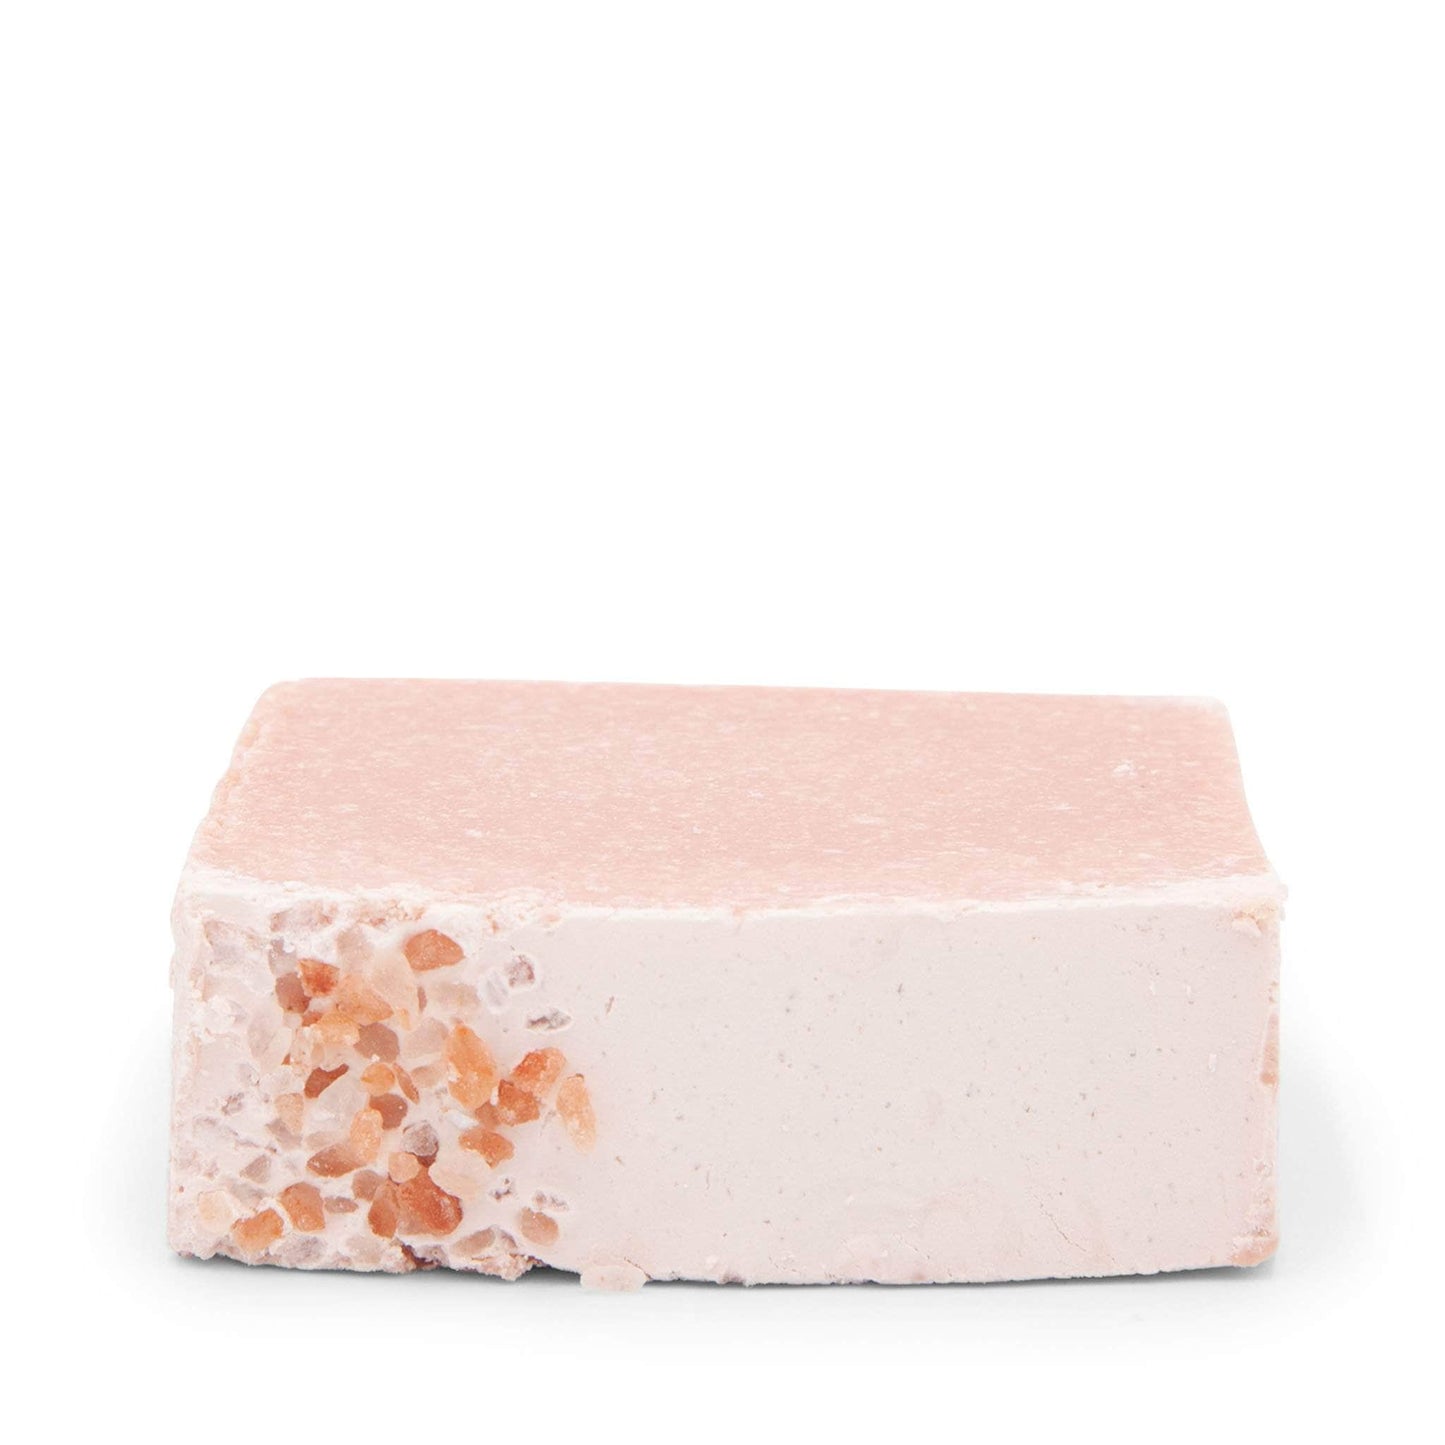 Load image into Gallery viewer, Janni Bars Soap Janni Bars Cold Pressed Soap - Pink Himalyan Salt Soap
